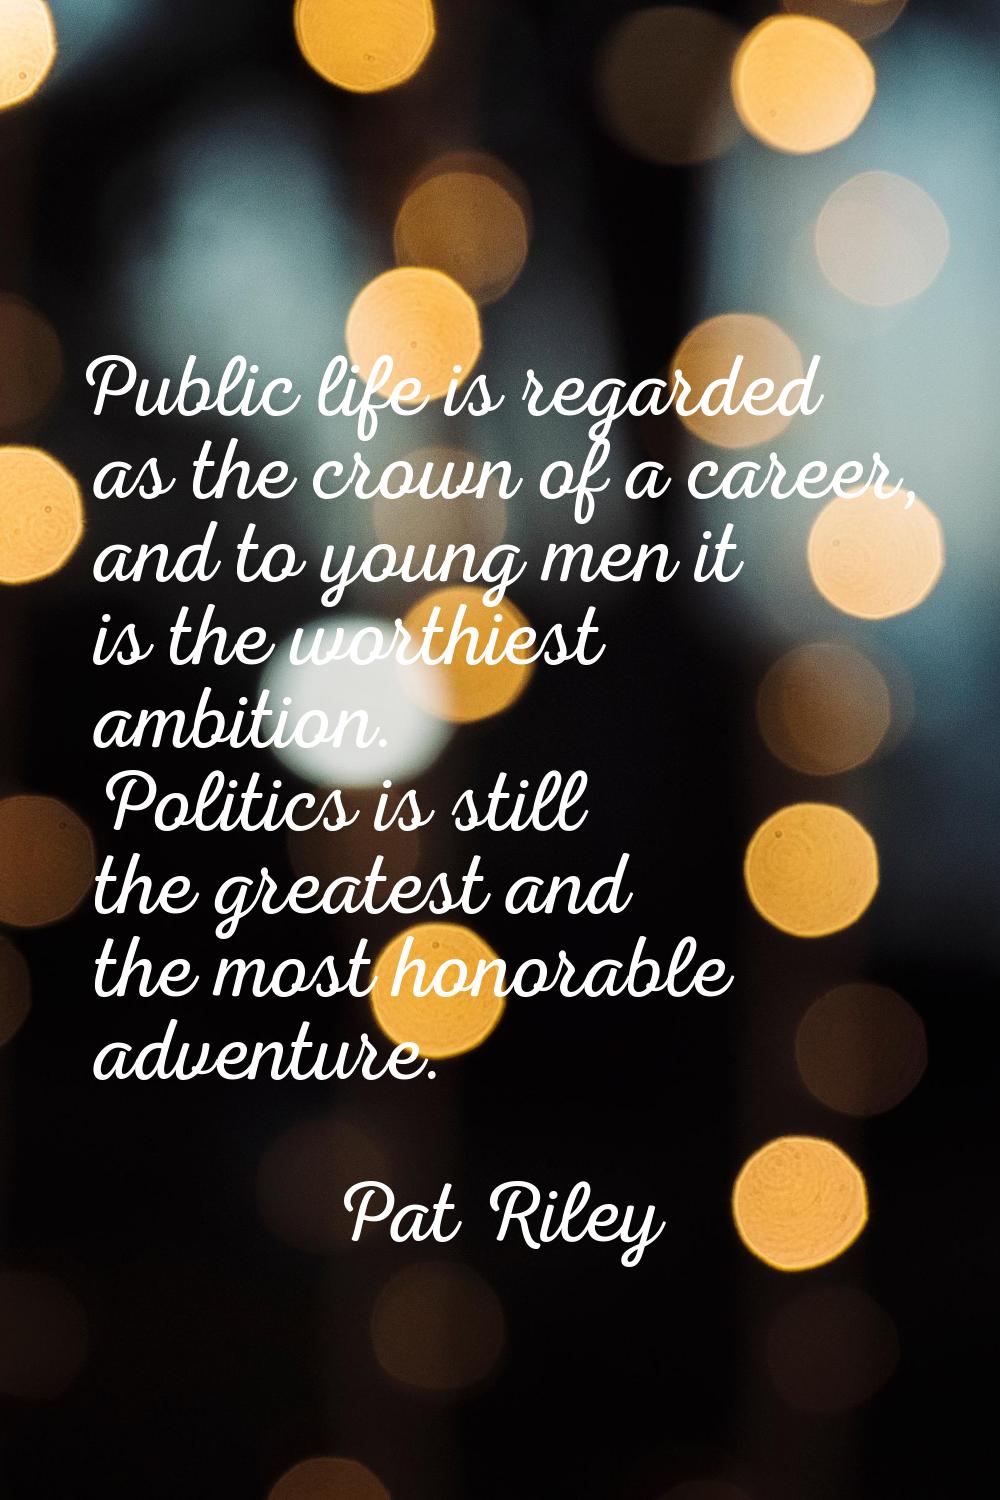 Public life is regarded as the crown of a career, and to young men it is the worthiest ambition. Po